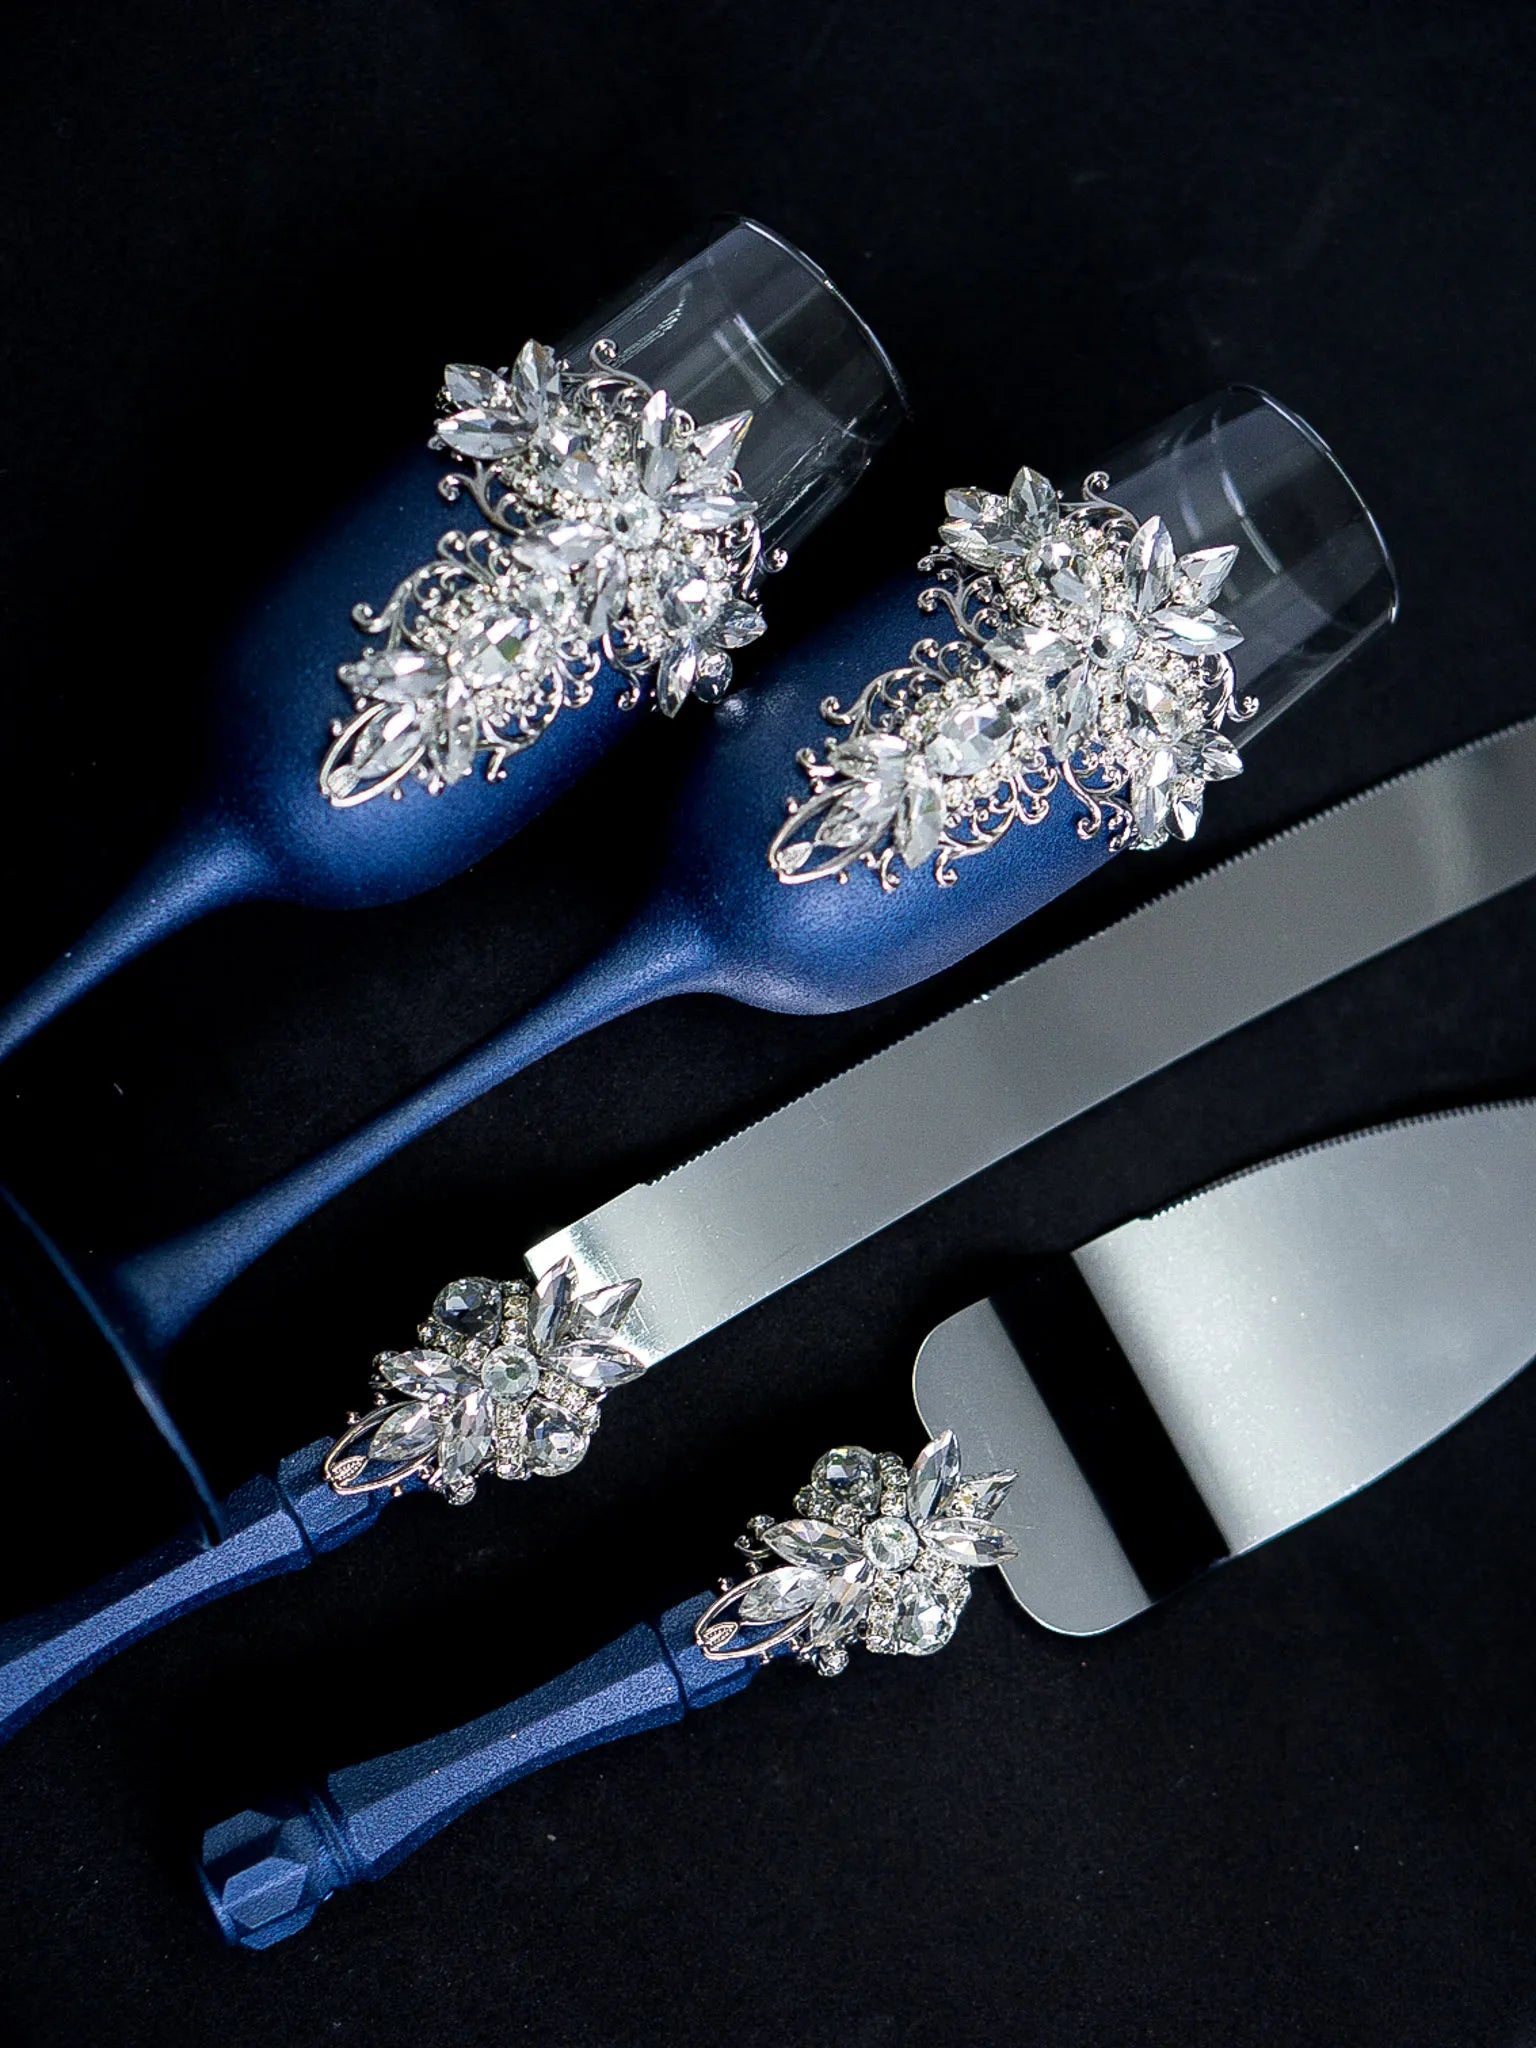 Personalized Silver and Navy Blue Monogrammed Wedding Toasting Glasses and Cake Knife Set